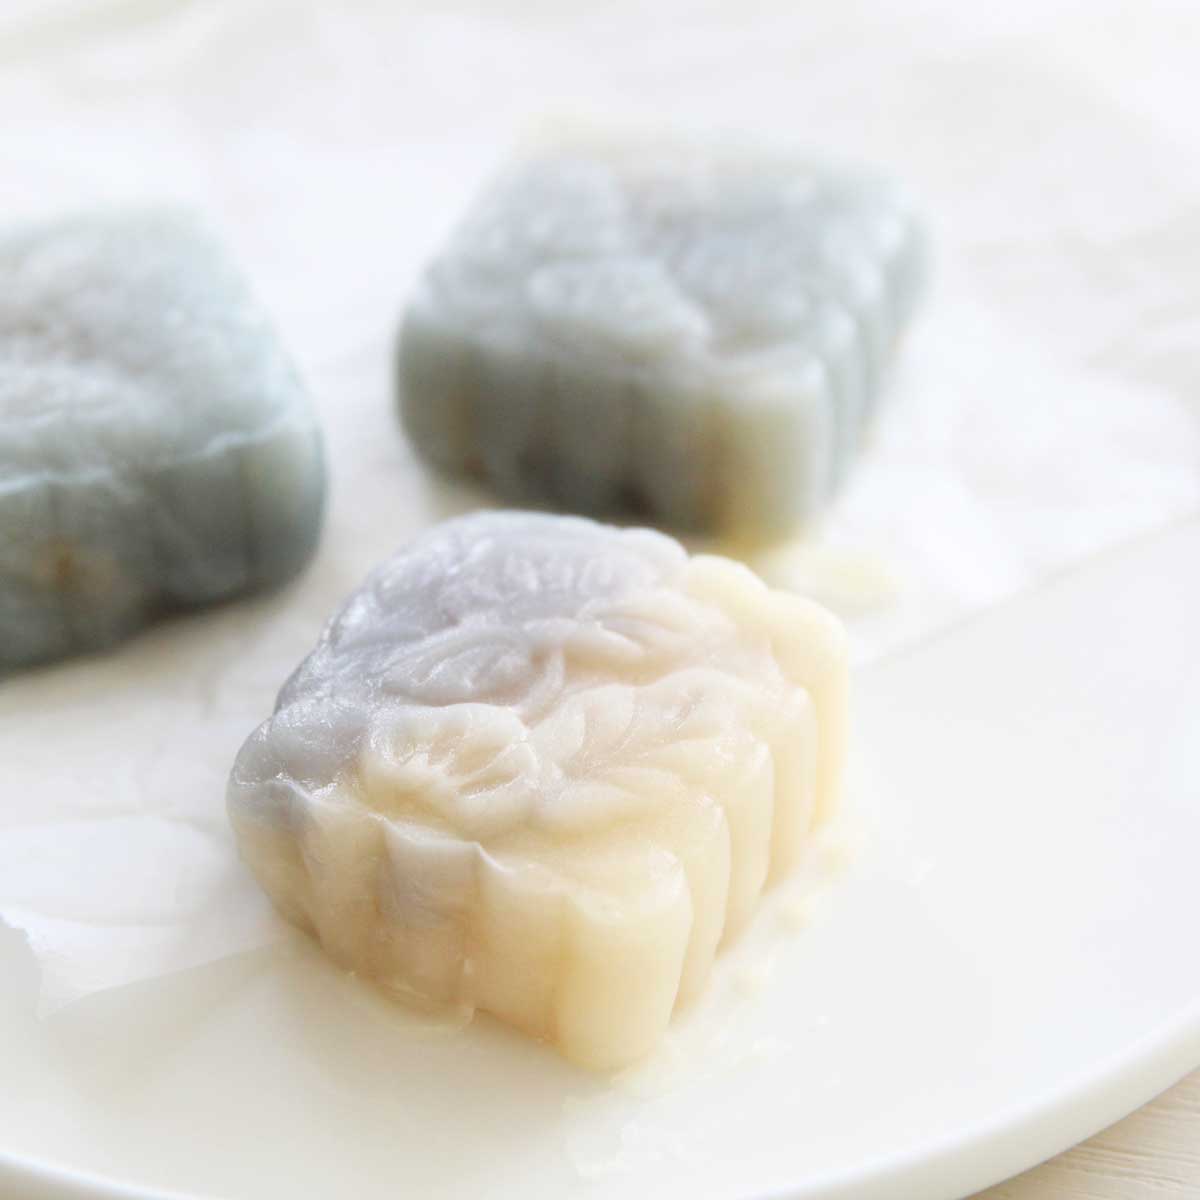 10 Minute Butterfly Pea Snowskin Mooncakes (No Steaming Required!) - Walnut Butter Mooncakes